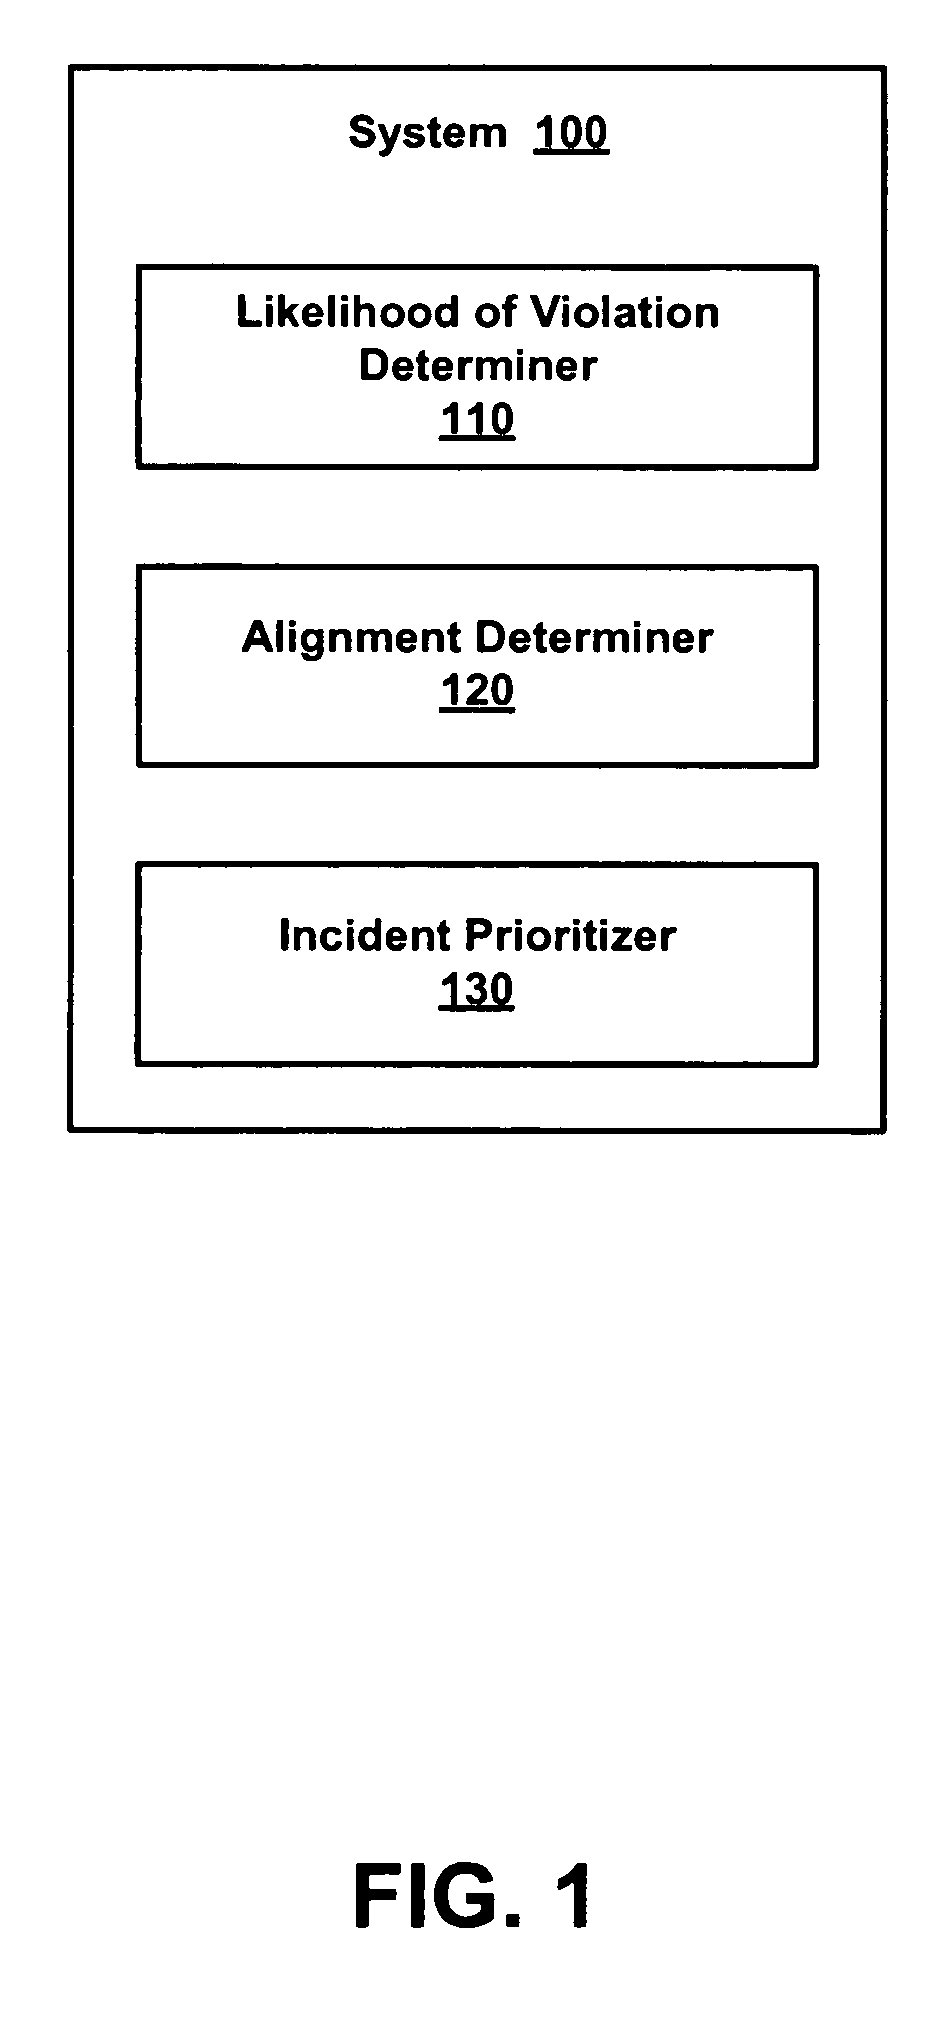 Prioritizing service degradation incidents based on business objectives